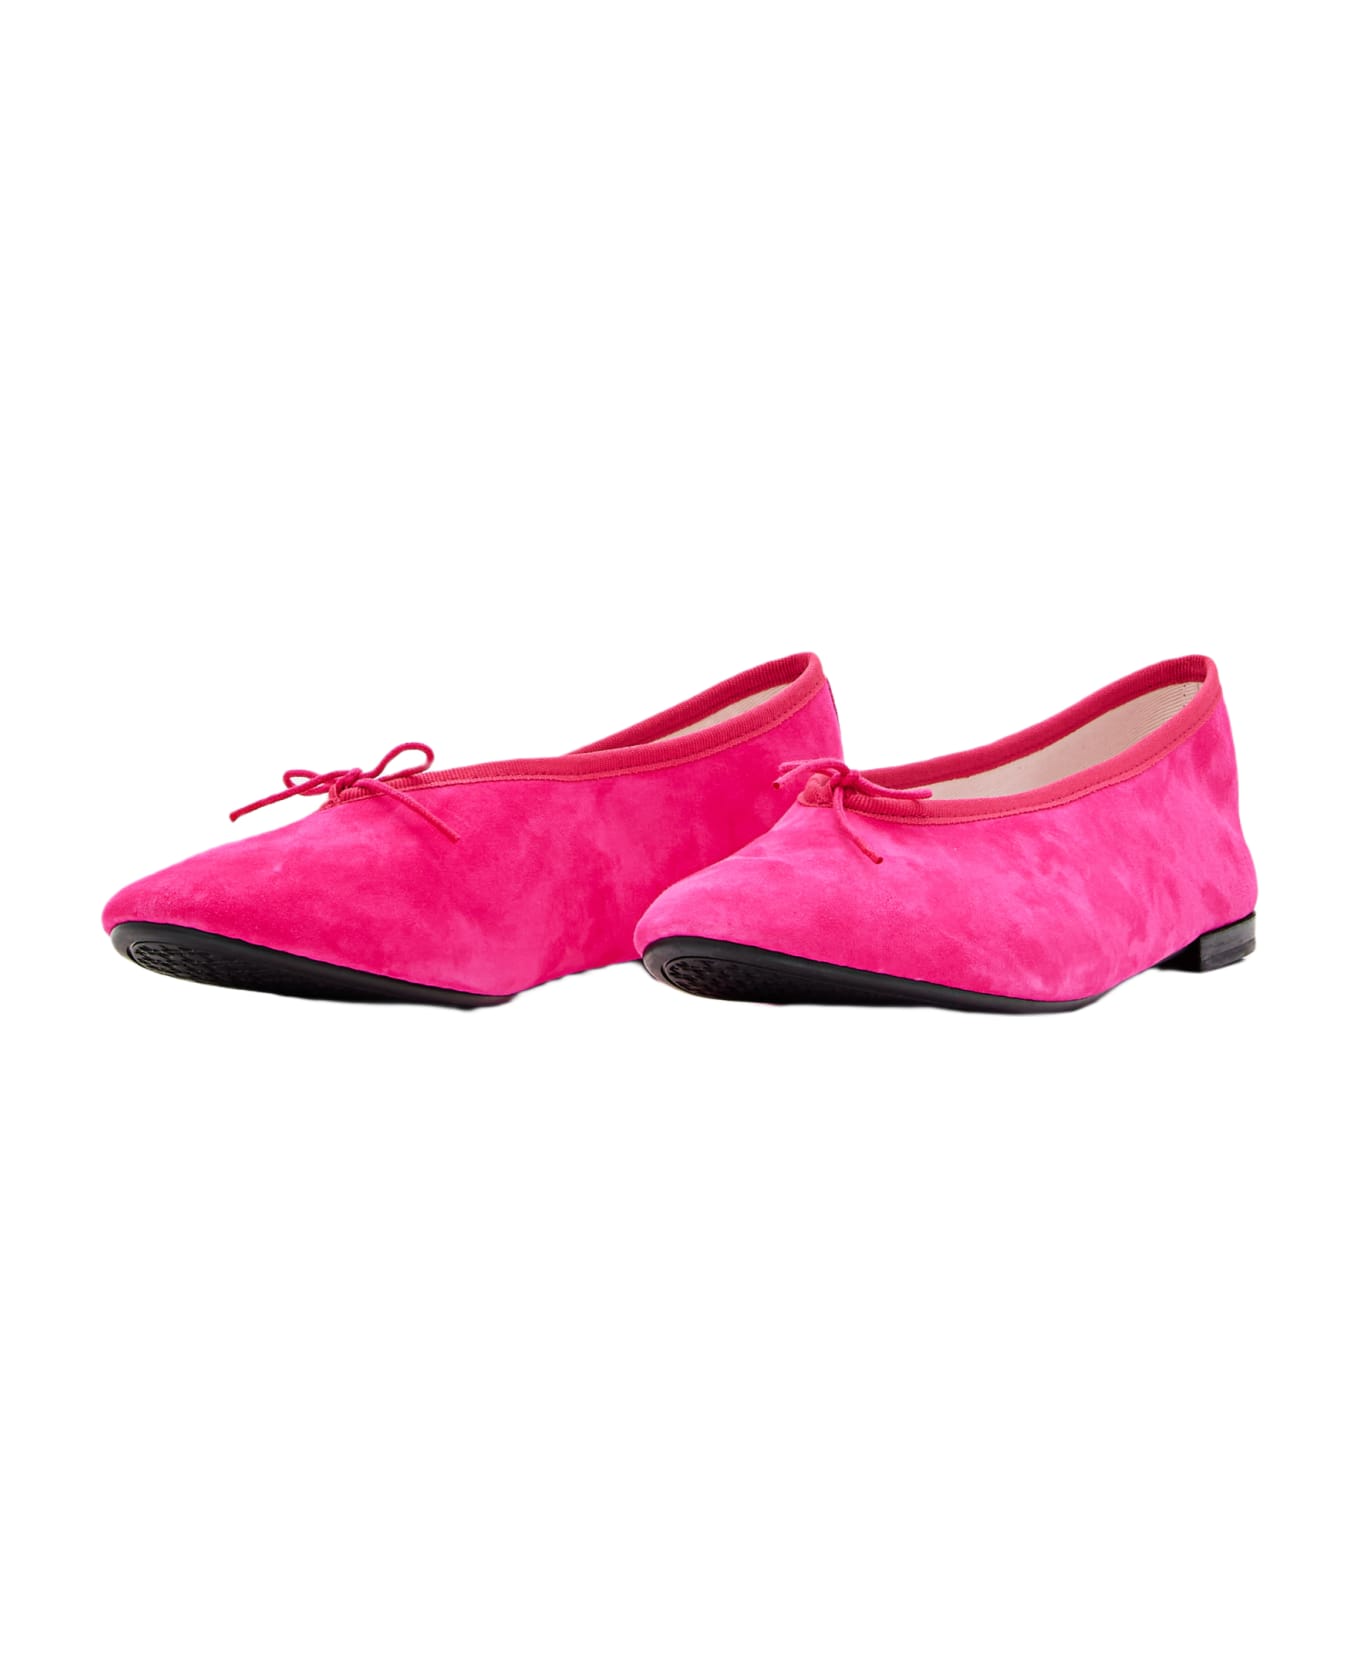 Repetto Lilouh Leather Ballerinas - Pink フラットシューズ